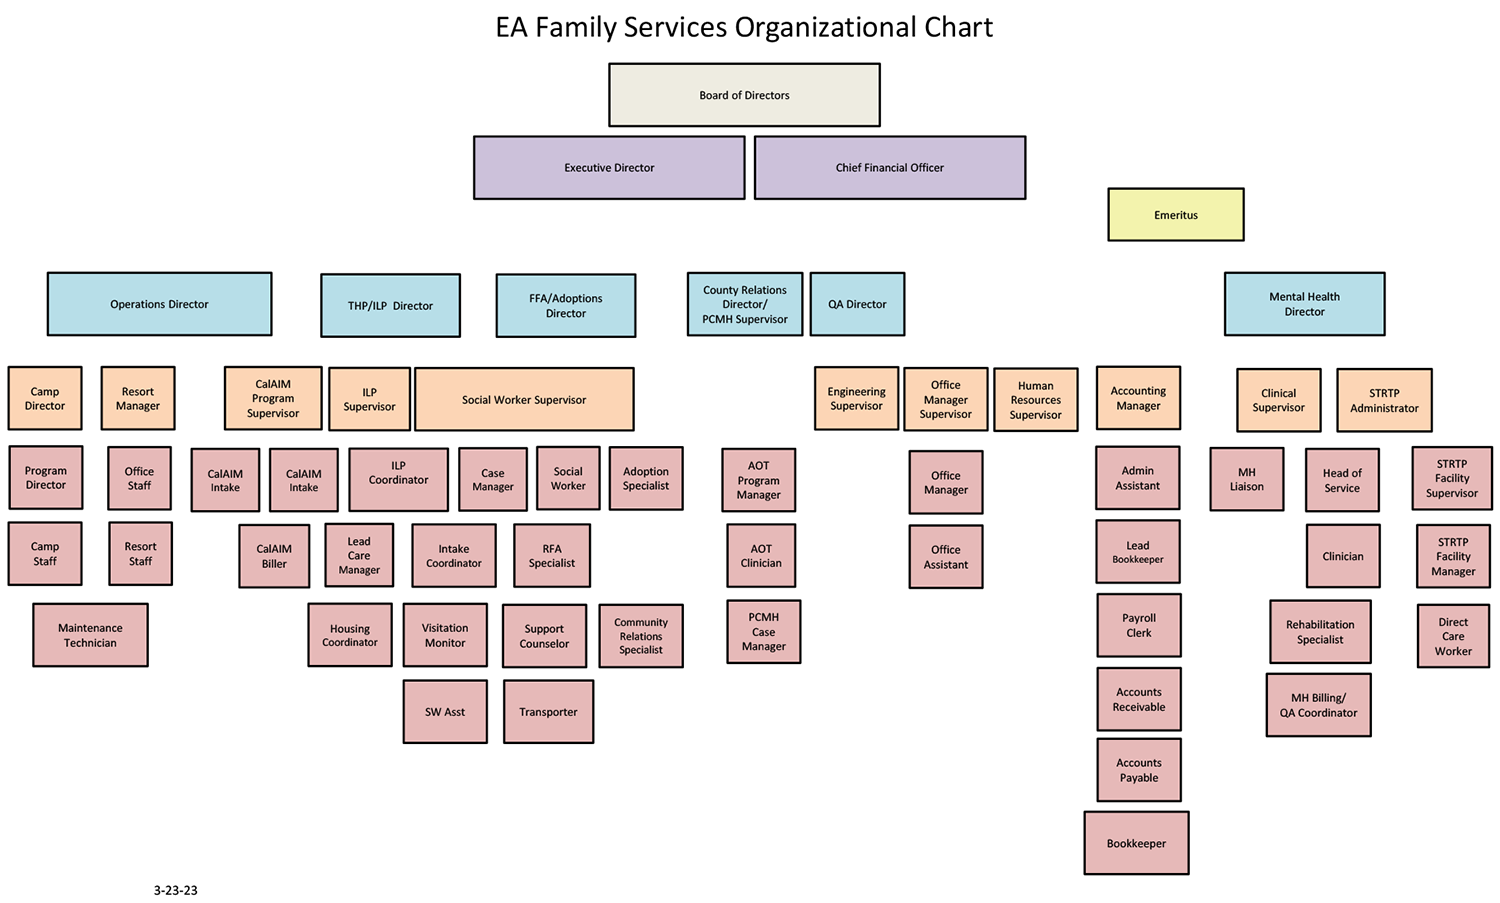 EA Family Services Organizational Chart click to view PDF